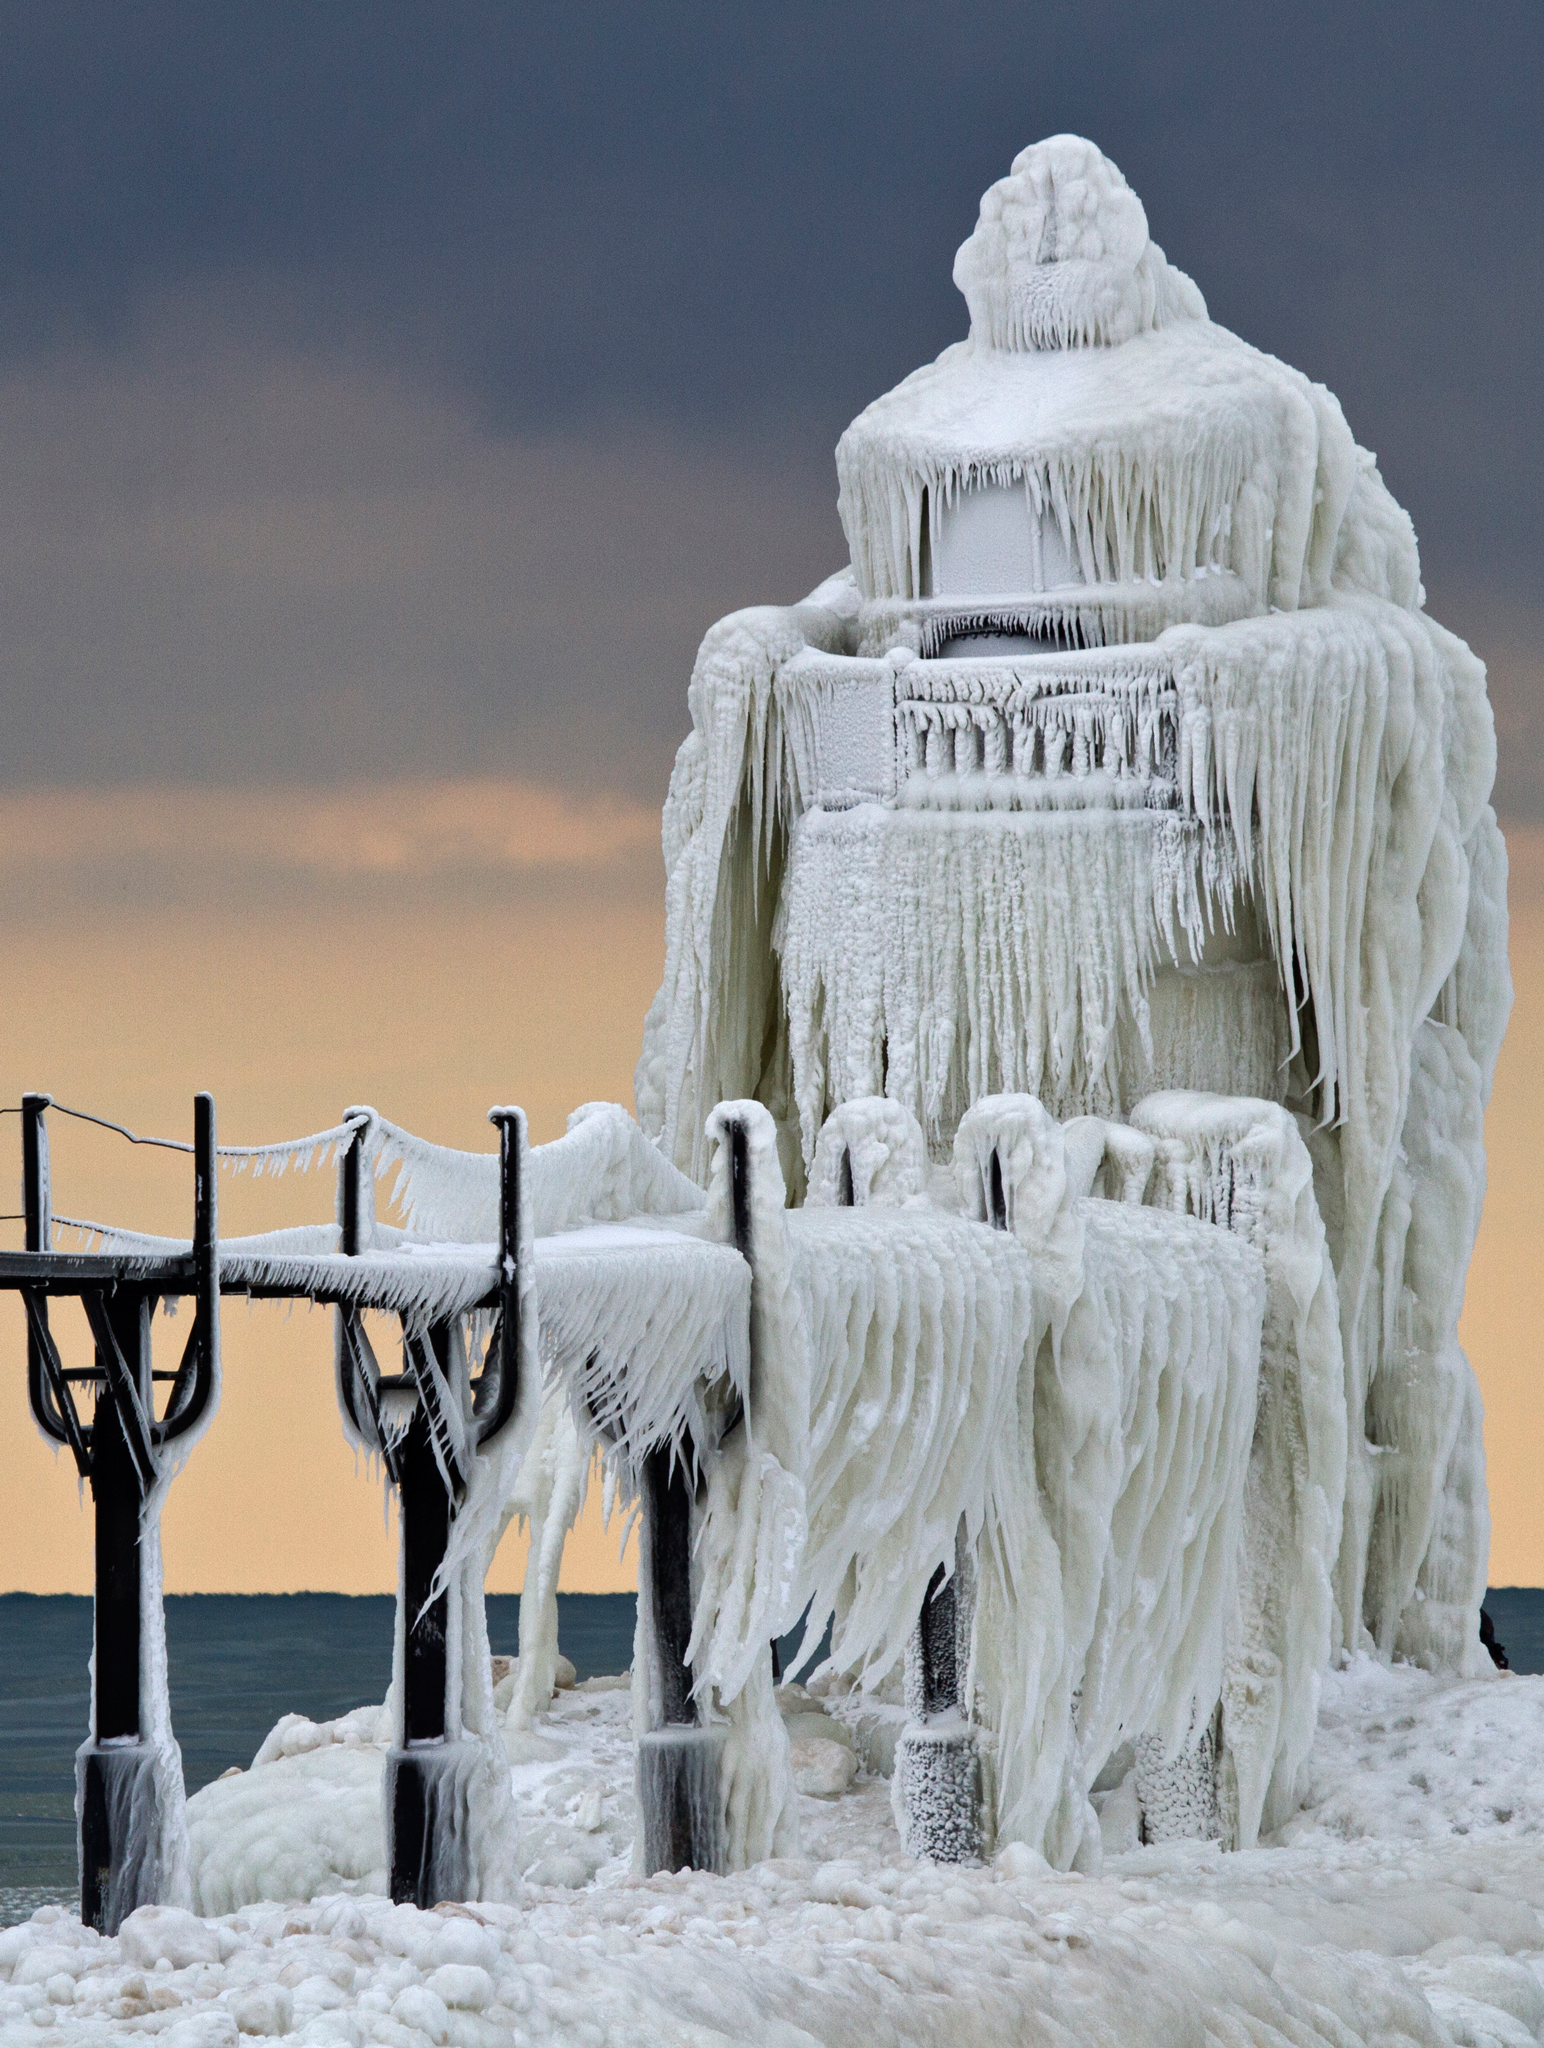 Frozen Lighthouse Becomes Dramatic Ice Sculpture | DiscoverMagazine.com